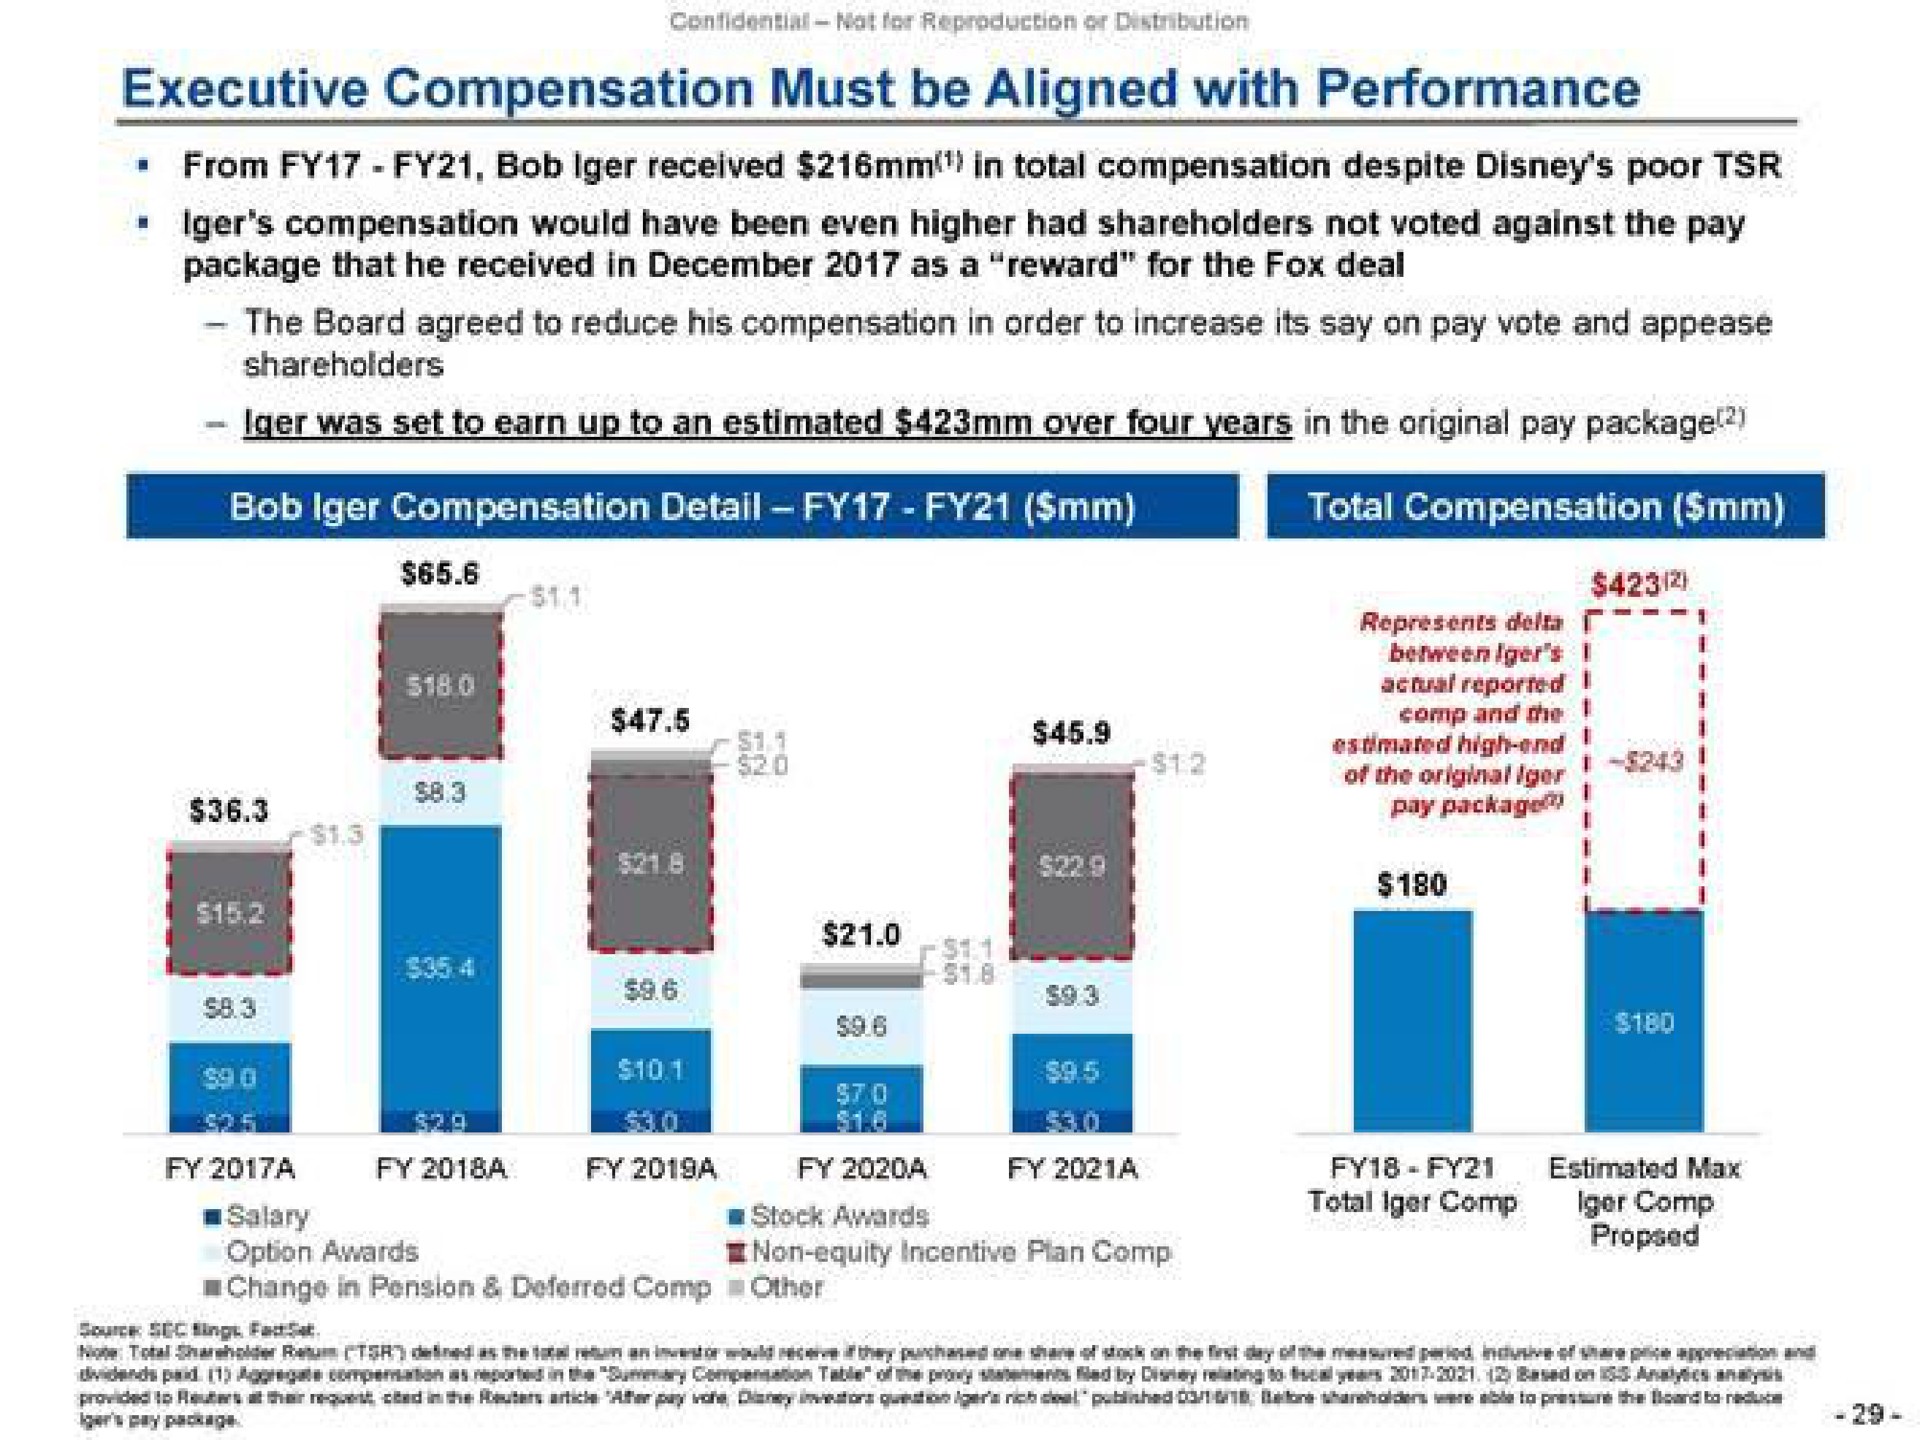 executive compensation must be with performance from bob received in total compensation despite poor compensation would have been even higher had shareholders not voted against the pay package that he received in as a reward for the fox deal the board agreed to reduce his compensation in order to increase its say on pay vote and appease shareholders in the original pay package bob compensation detail total compensation represents delta | Trian Partners